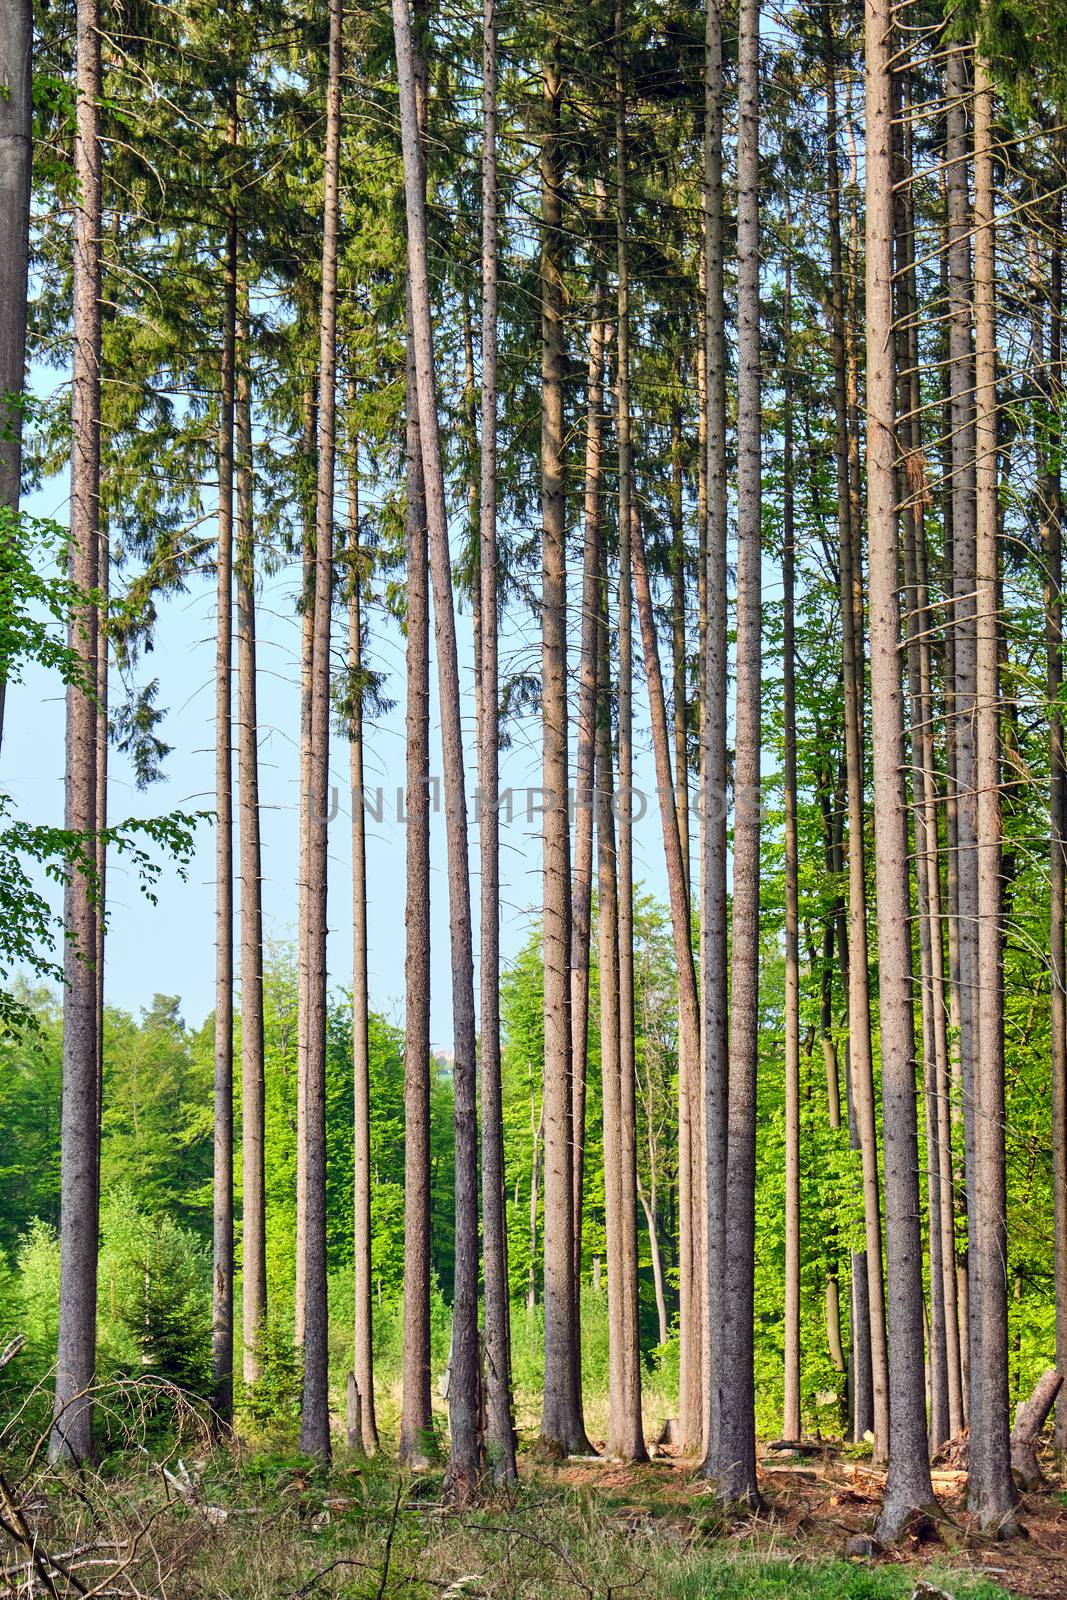 Trunks of some high spruce trees seen in a german forest